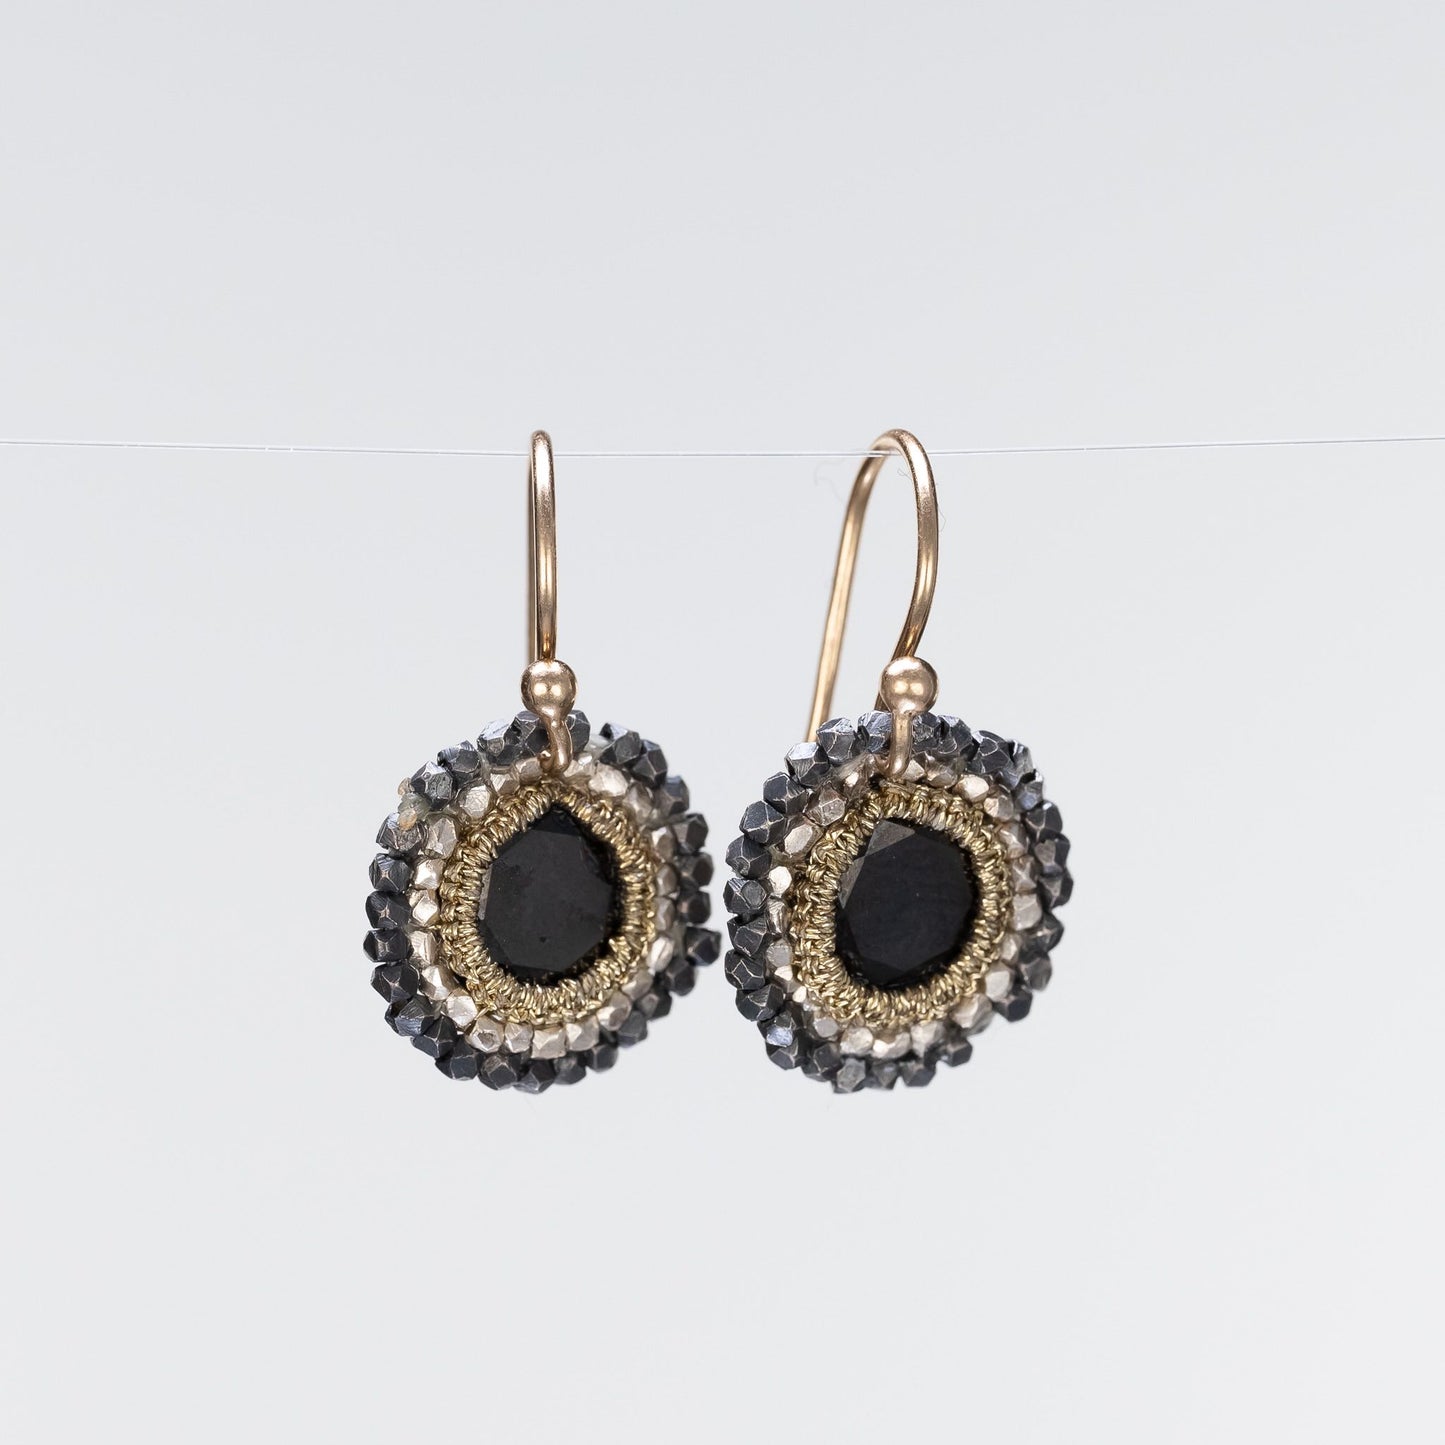 Danielle Welmond Caged Spinel Earrings with Pyrite Orbit